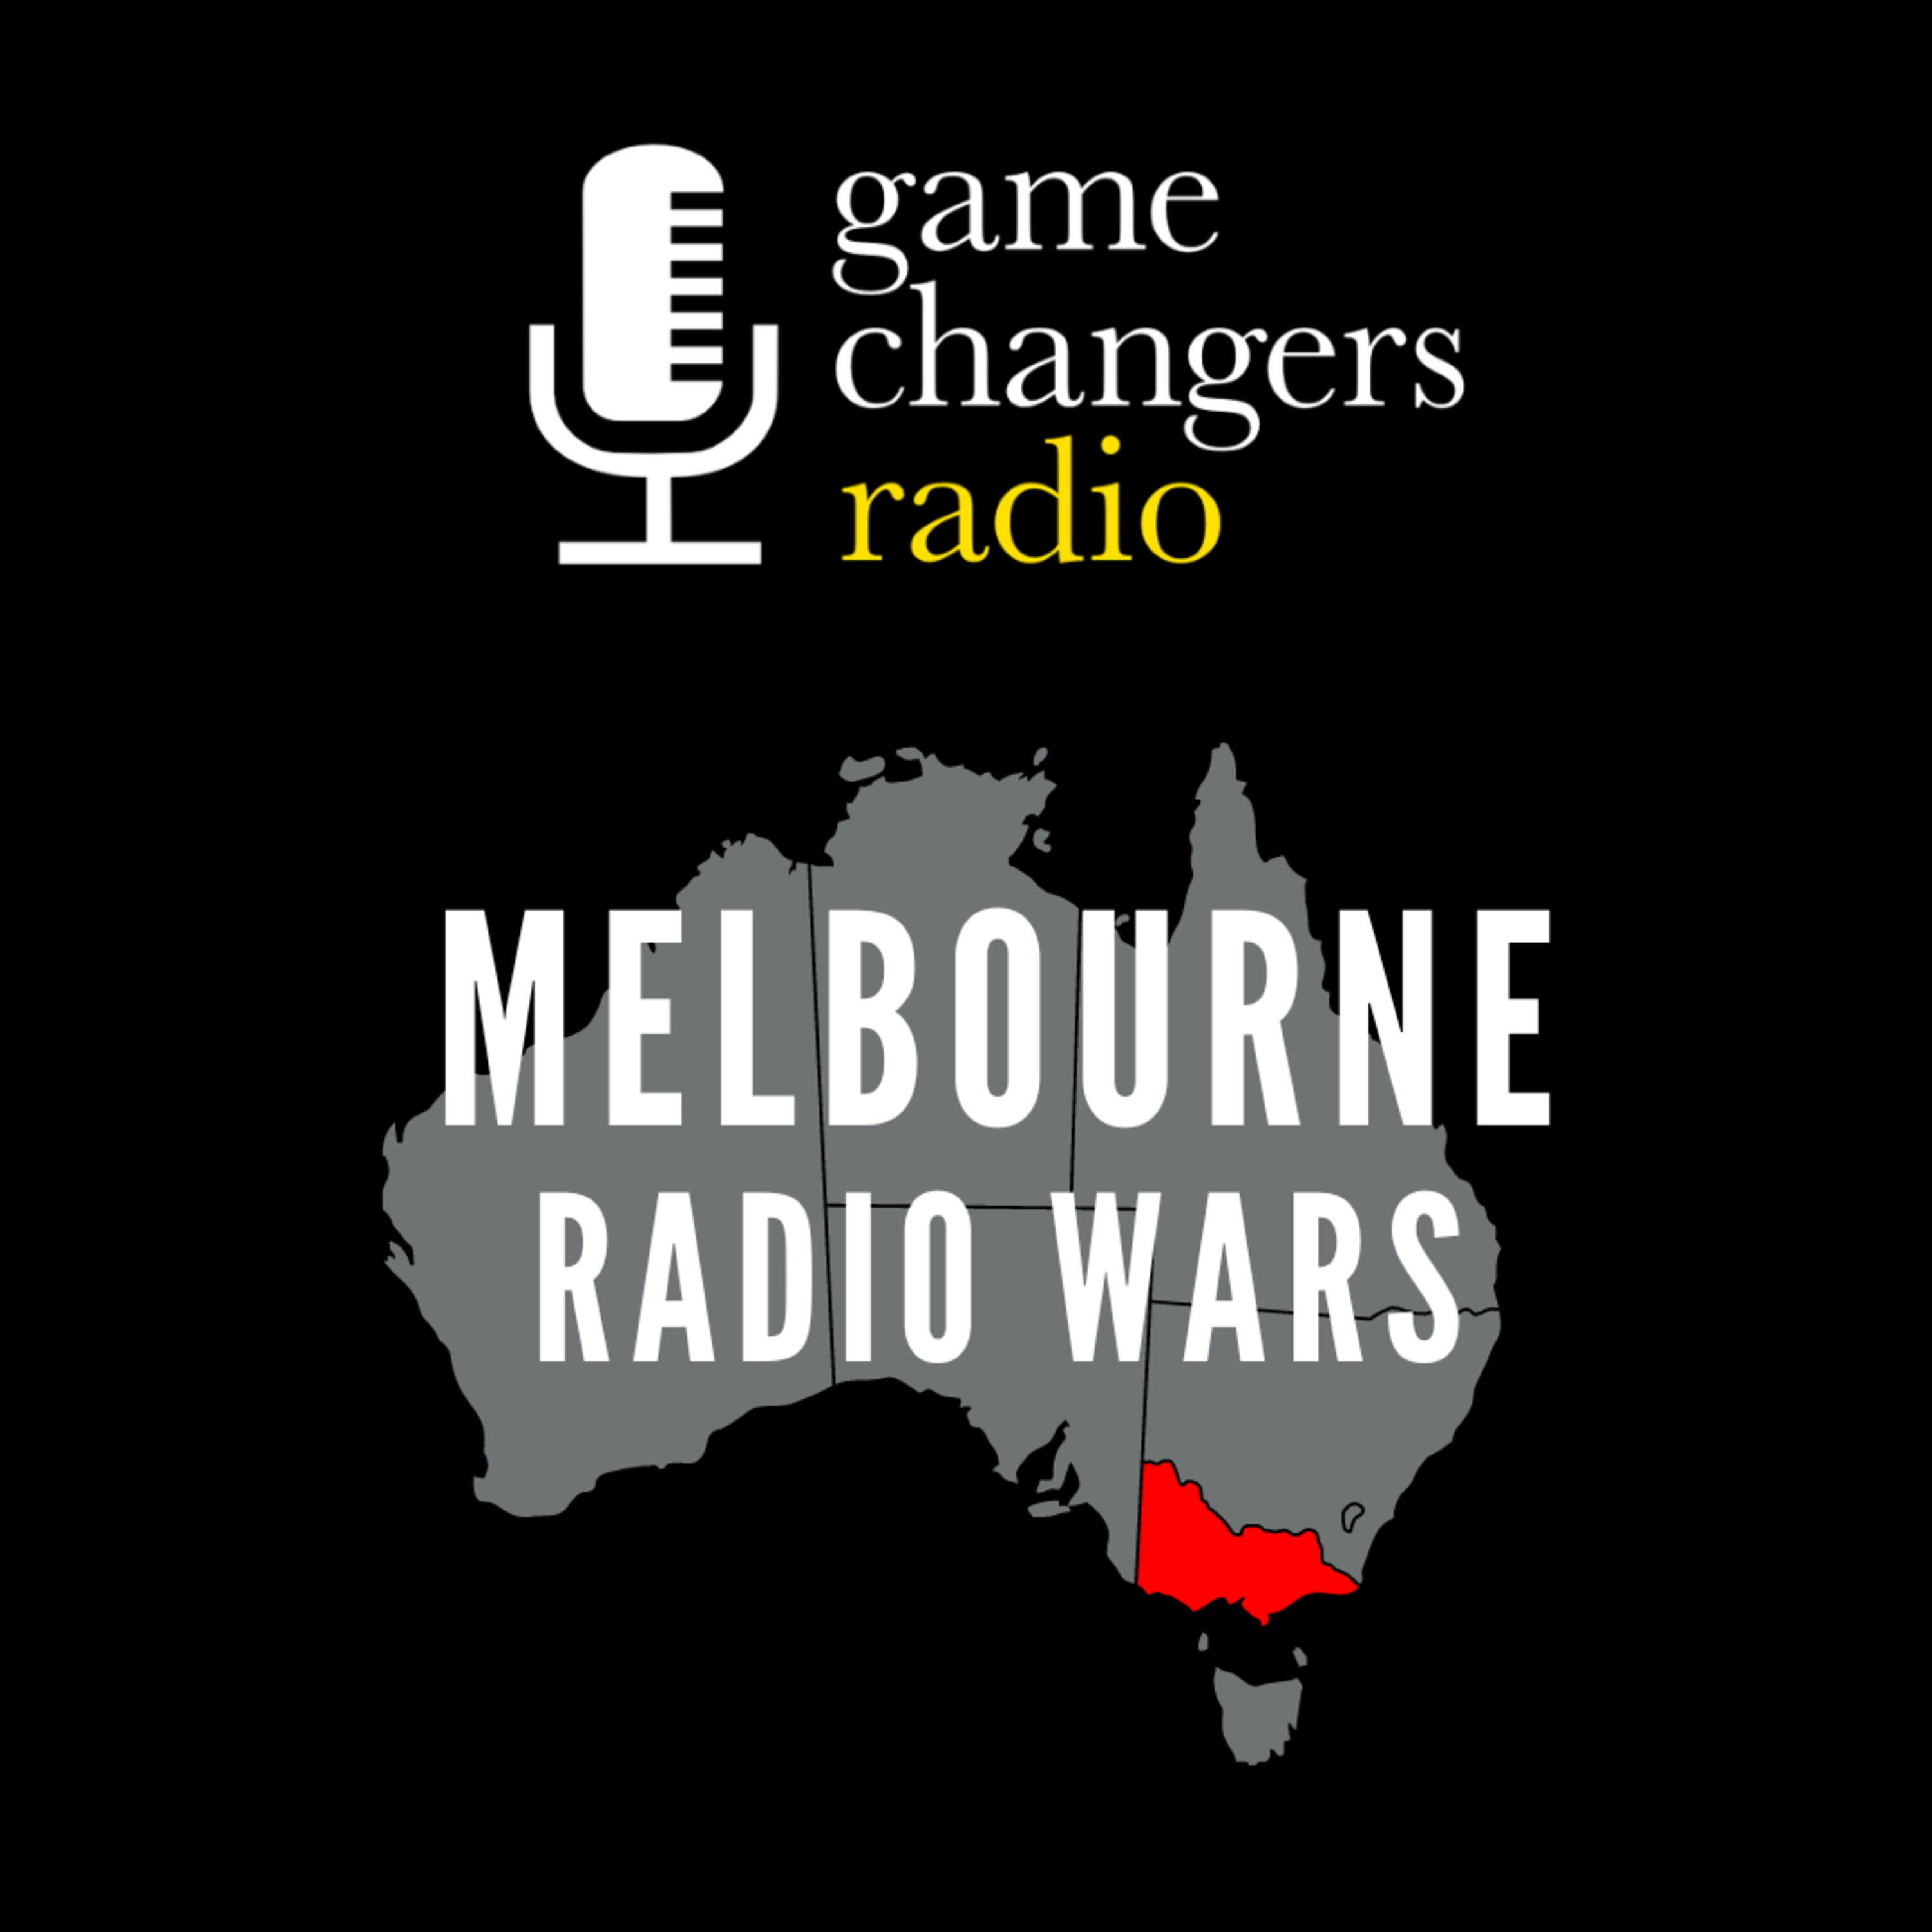 Introducing Game Changers: Melbourne Radio Wars